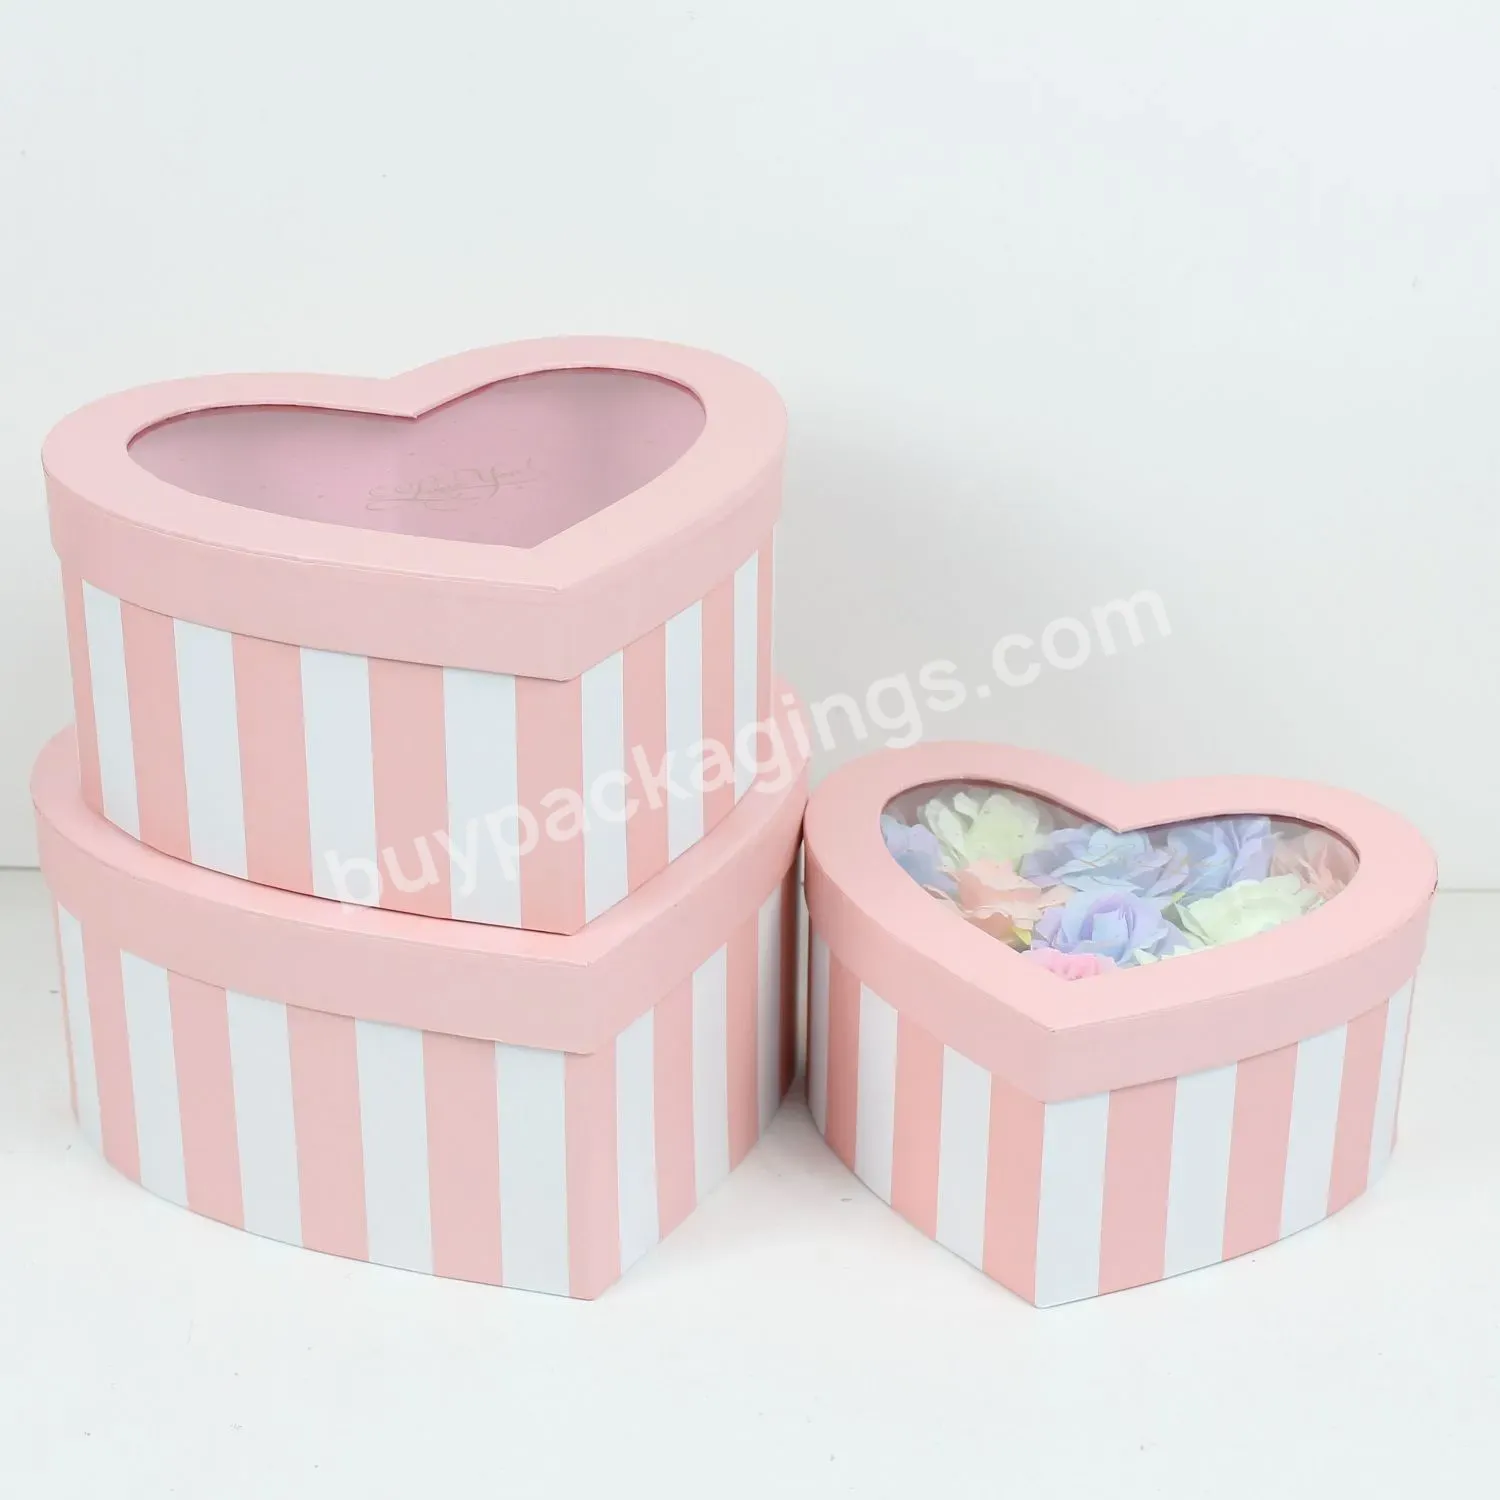 Wholesale Heart Shaped Flower Gift Box Clear Pvc Window Paper Box With Striped Pattern Printed - Buy Heart Shaped Flower Gift Box,Clear Pvc Window Paper Box,Paper Box With Striped Pattern Printed.